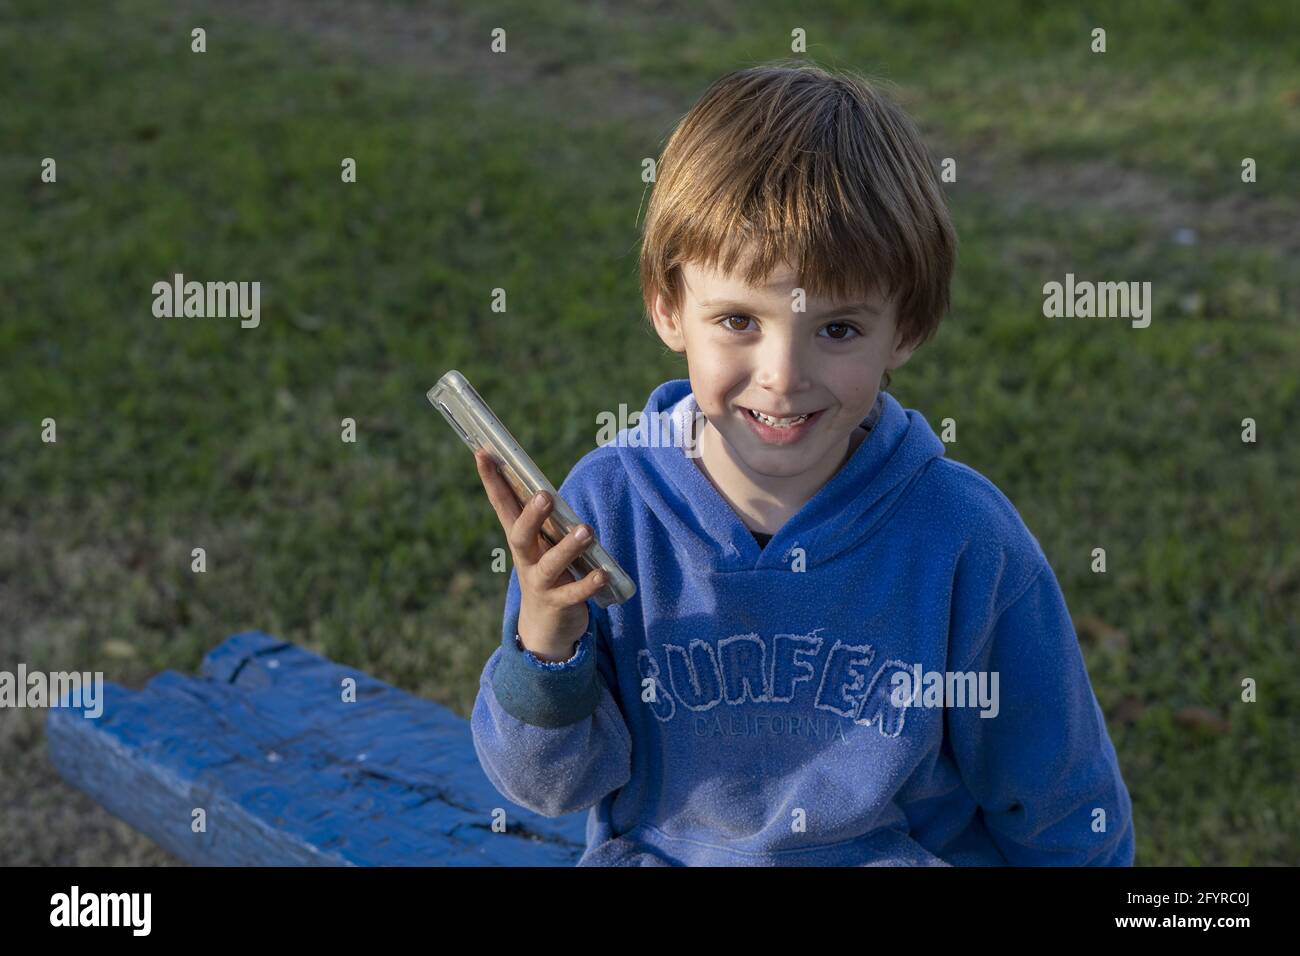 sitting in and - a park smiley holding boy Alamy bench with face blue hoodie phone with Caucasian a a Stock Photo on